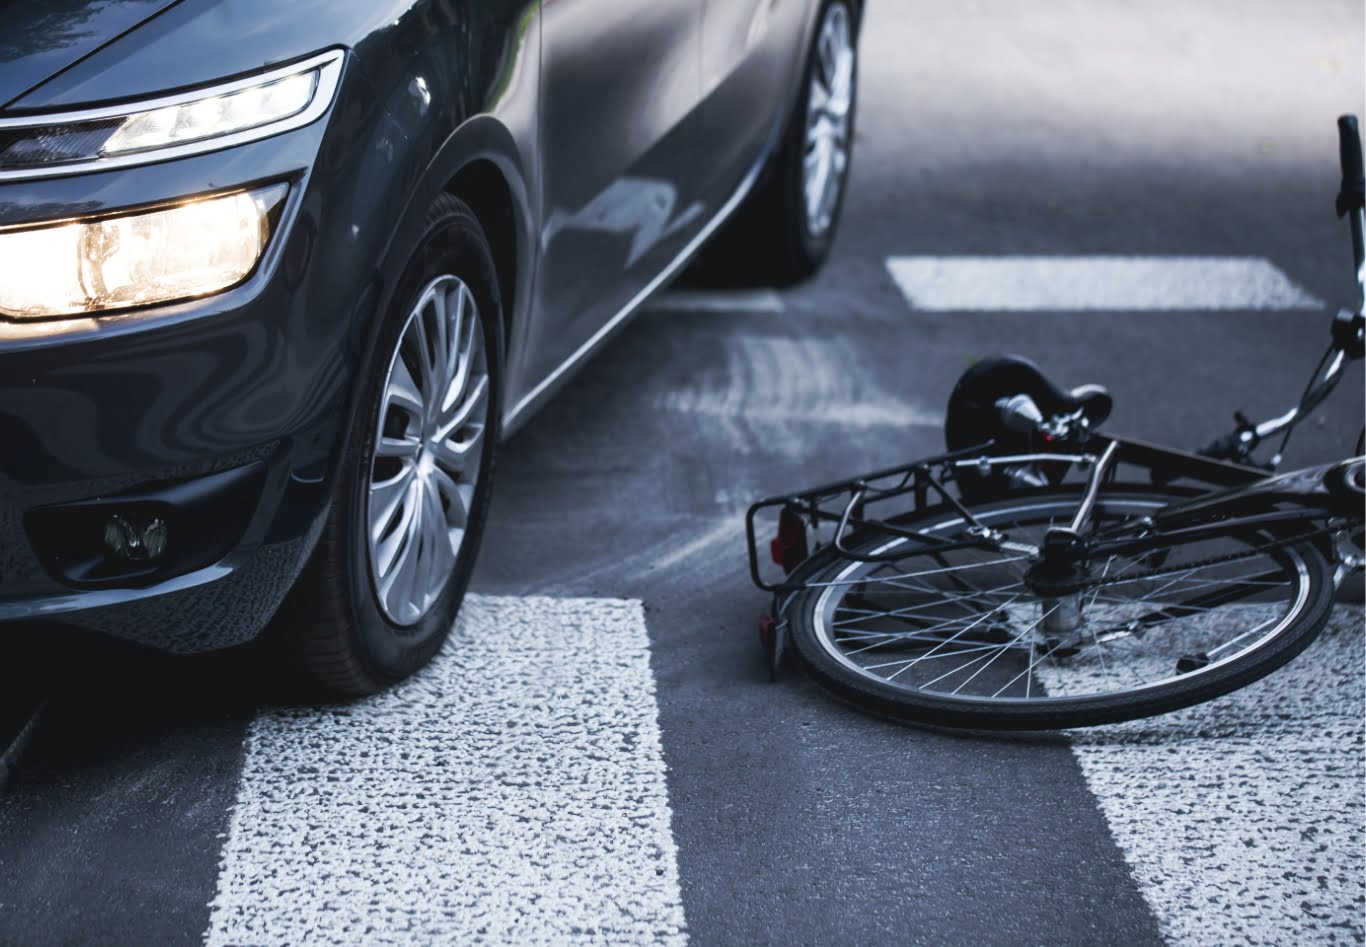 car beside a bicycle laying on the road